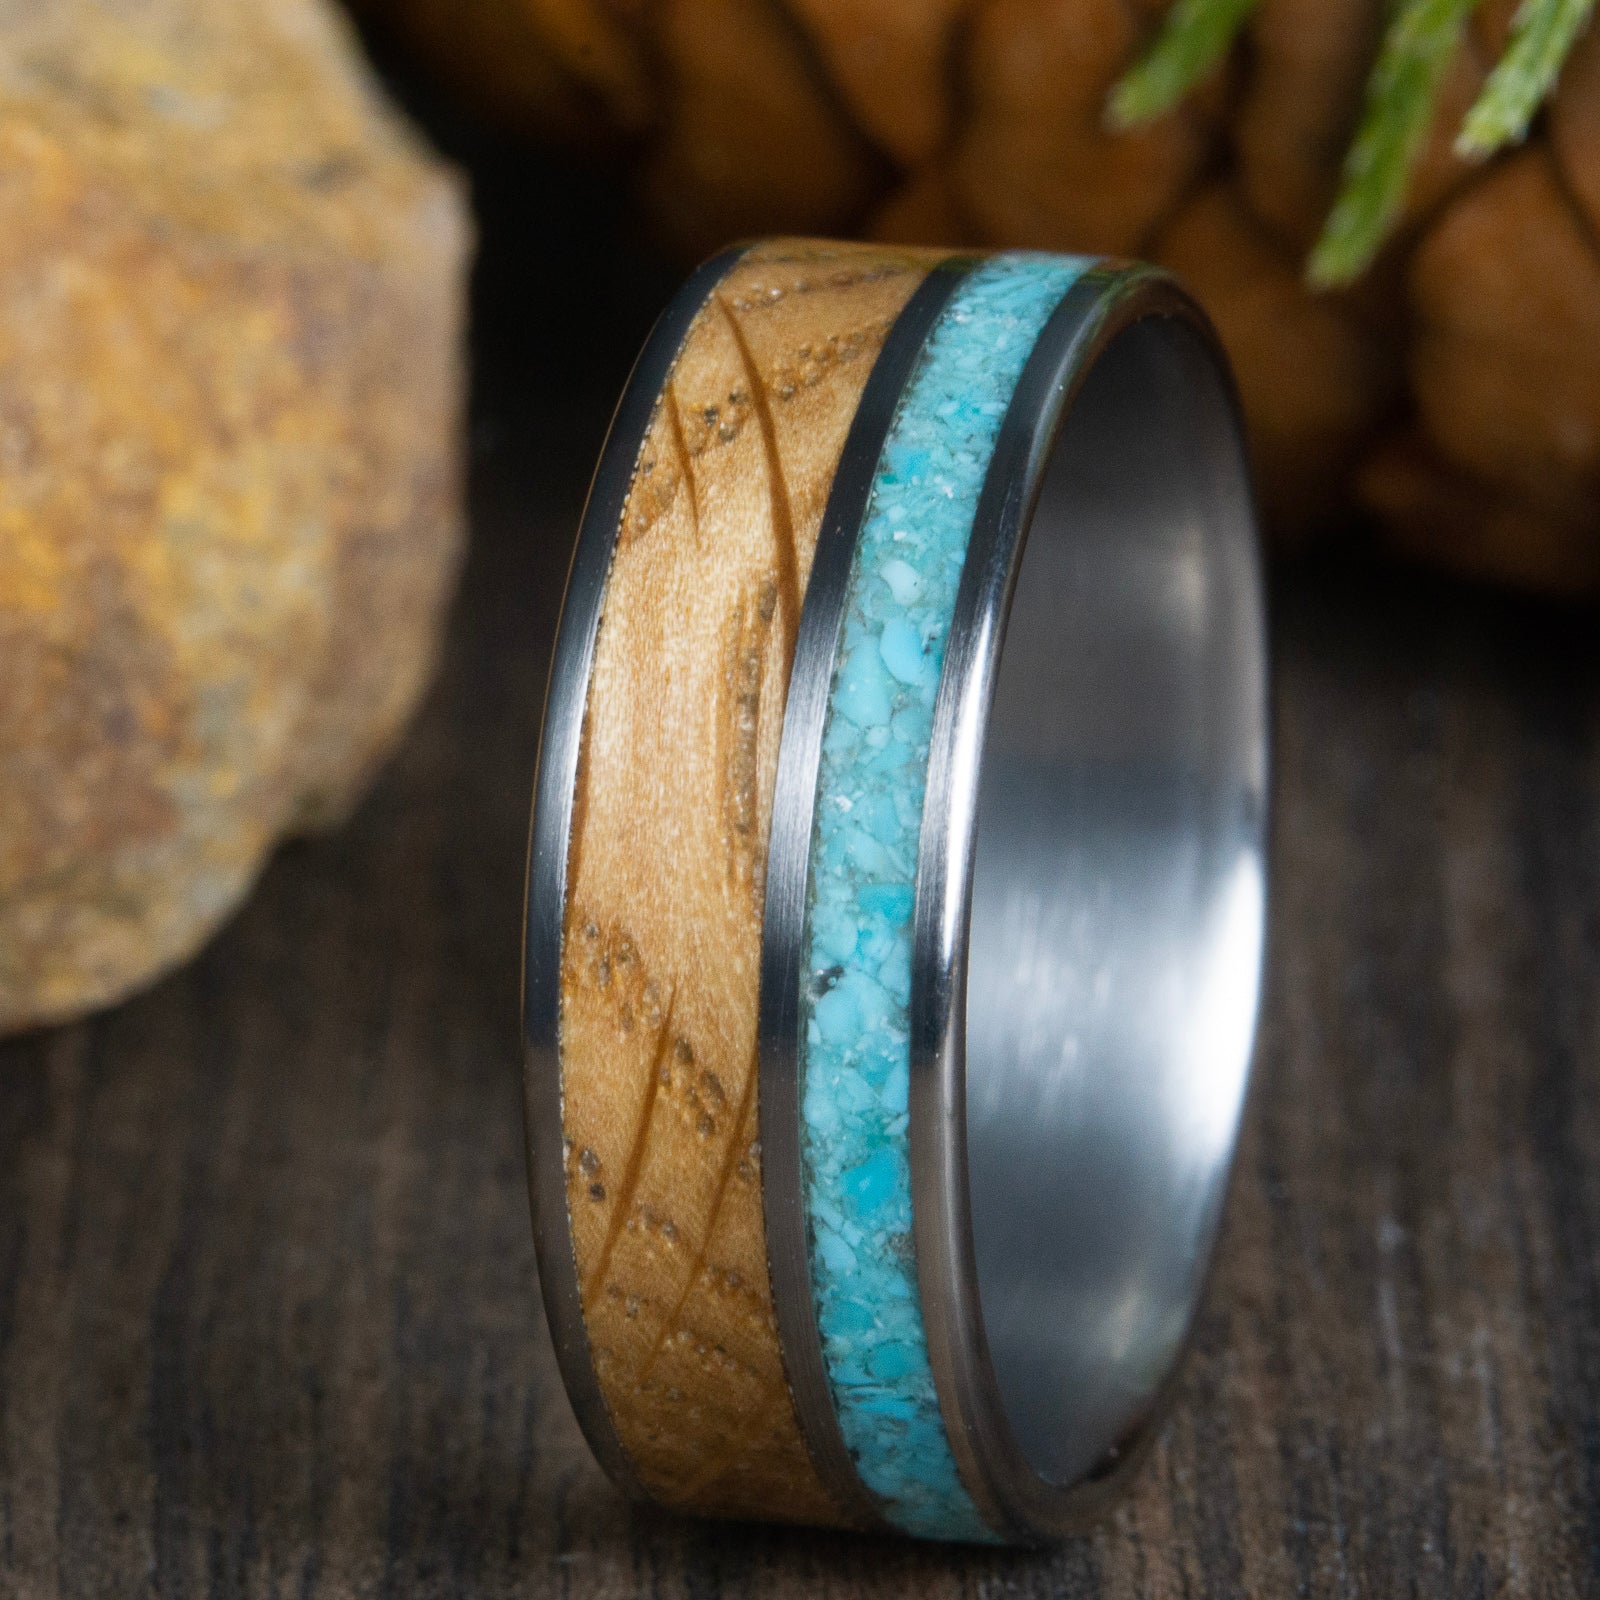 Whiskey barrel mens wedding ring with turquoise